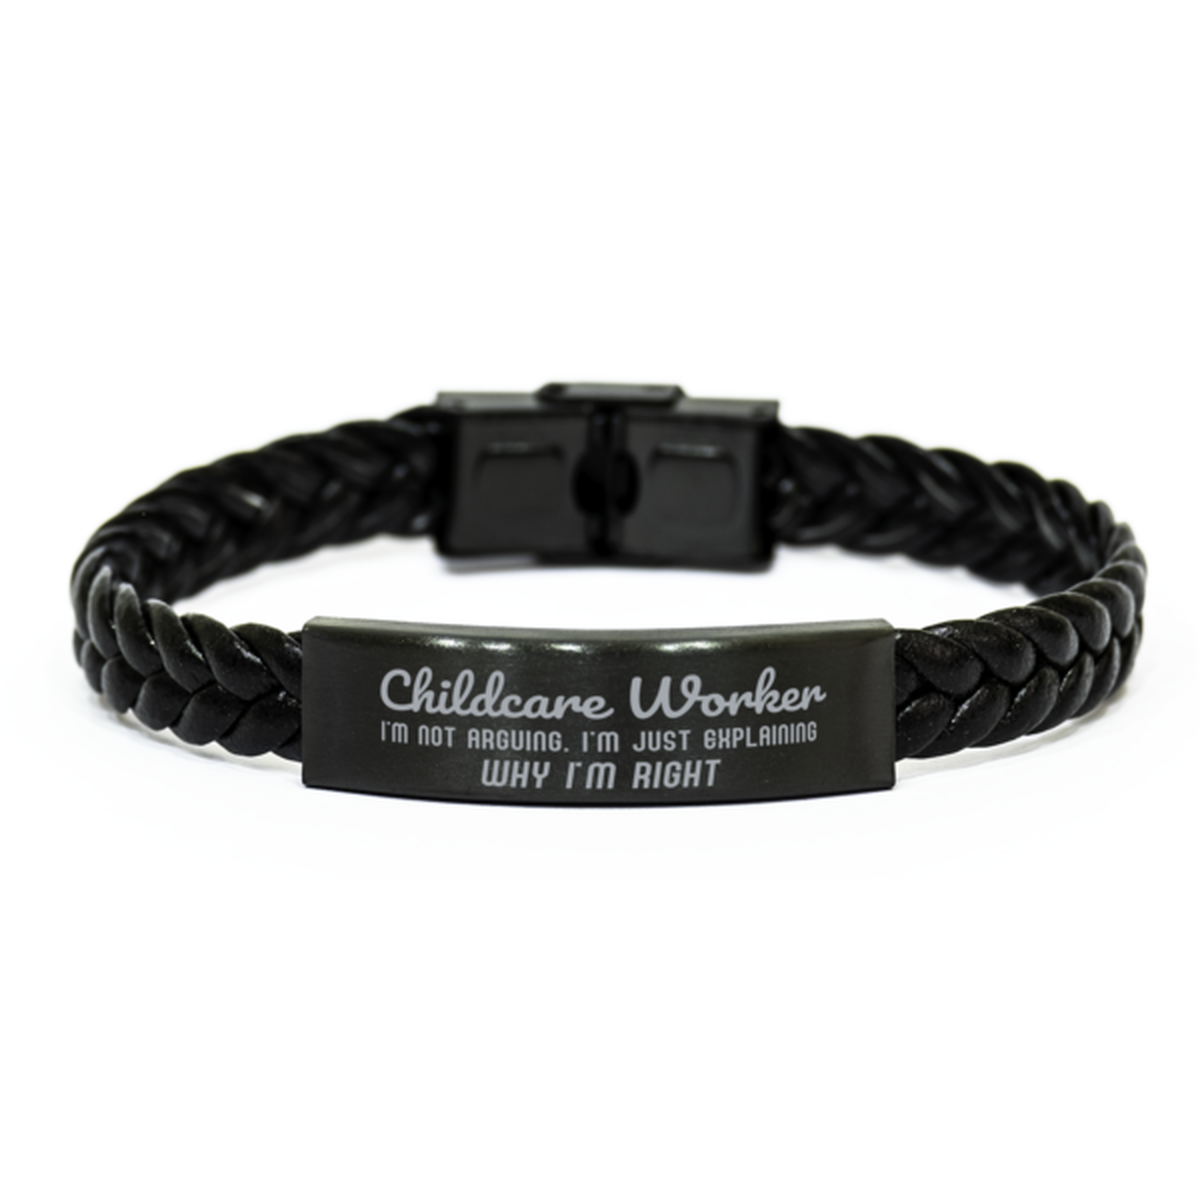 Childcare Worker I'm not Arguing. I'm Just Explaining Why I'm RIGHT Braided Leather Bracelet, Graduation Birthday Christmas Childcare Worker Gifts For Childcare Worker Funny Saying Quote Present for Men Women Coworker